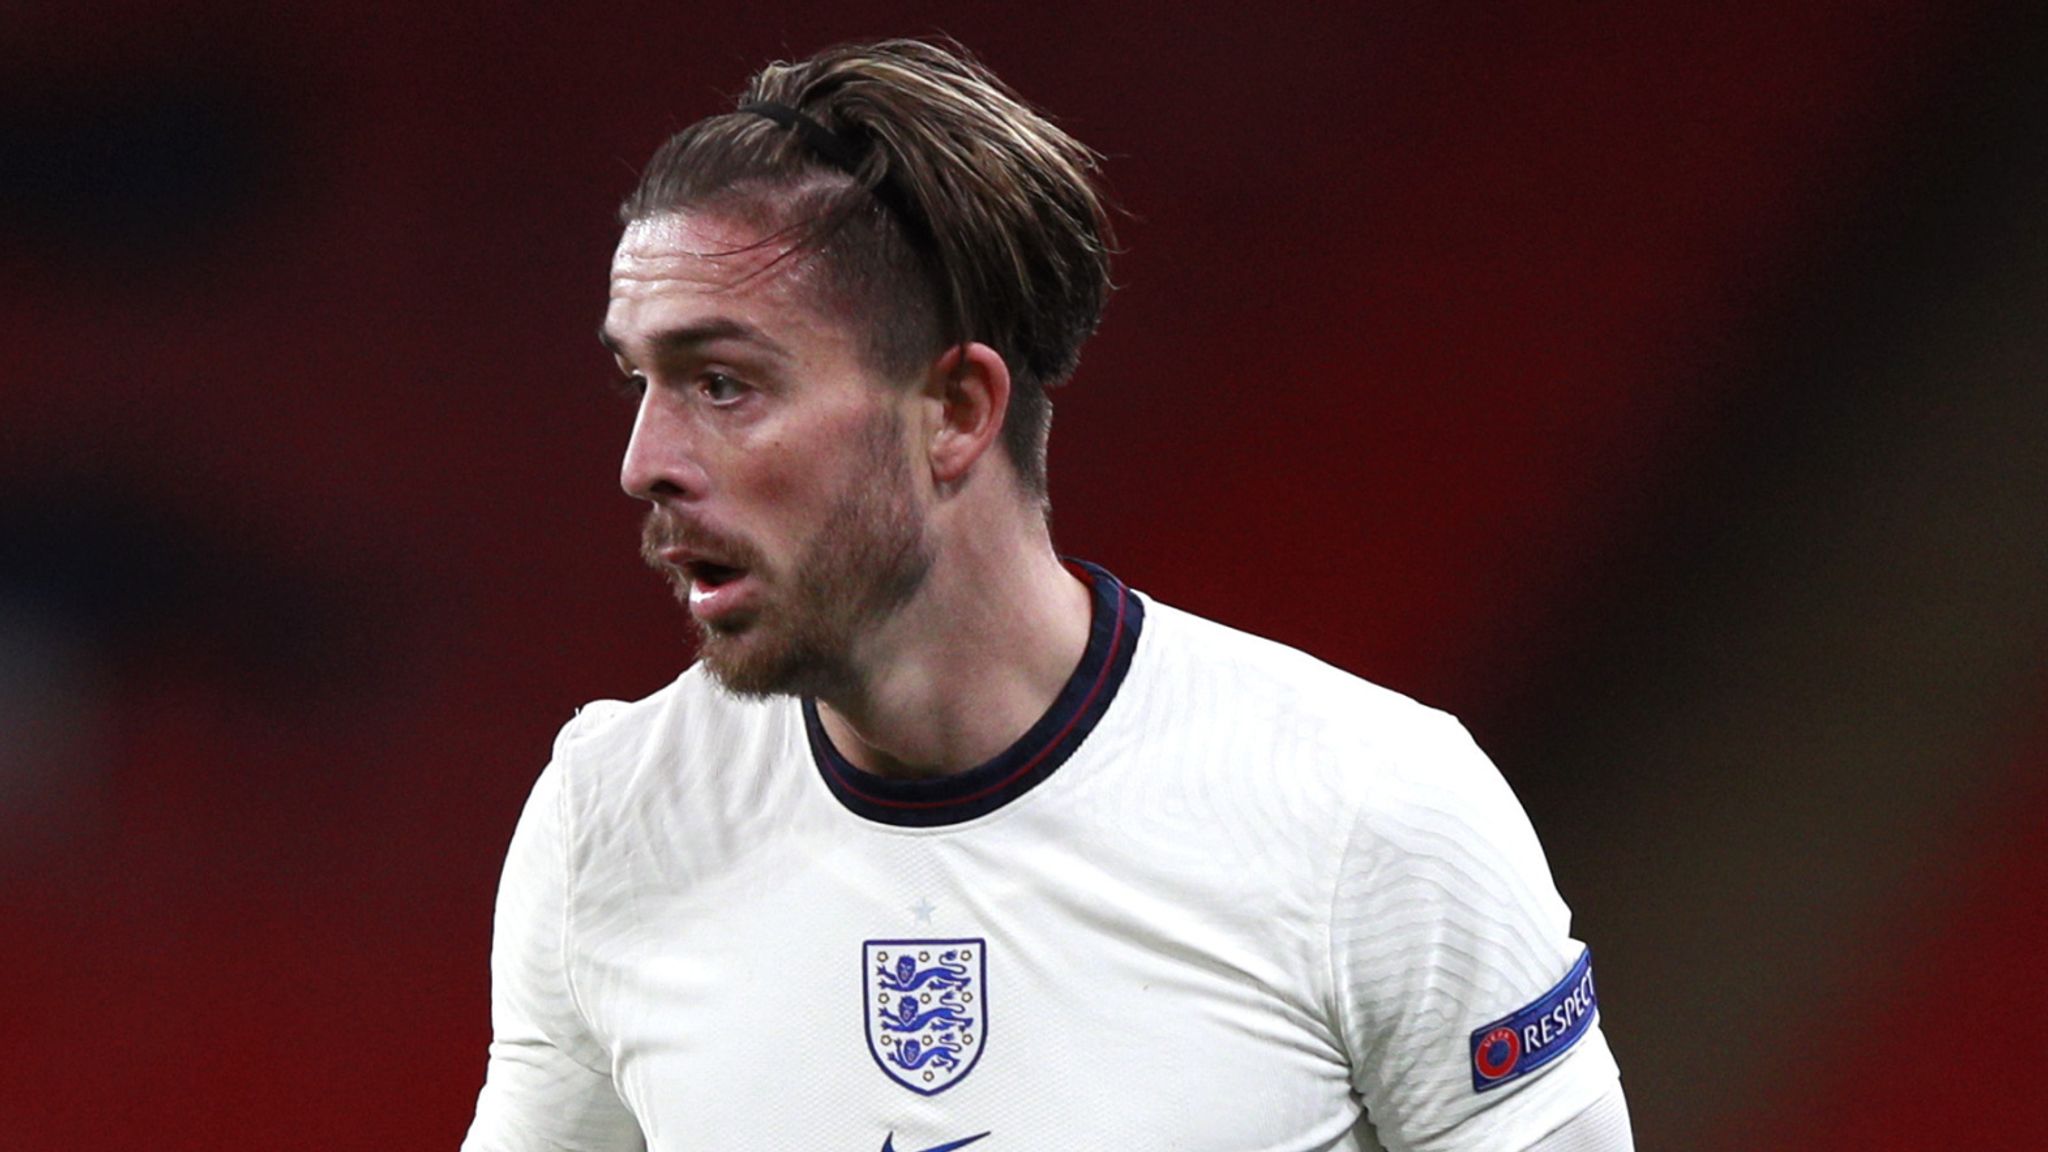 Jack Grealish: England midfielder prepared for rough treatment as he aims for successful Euro 2020 | Football News | Sky Sports